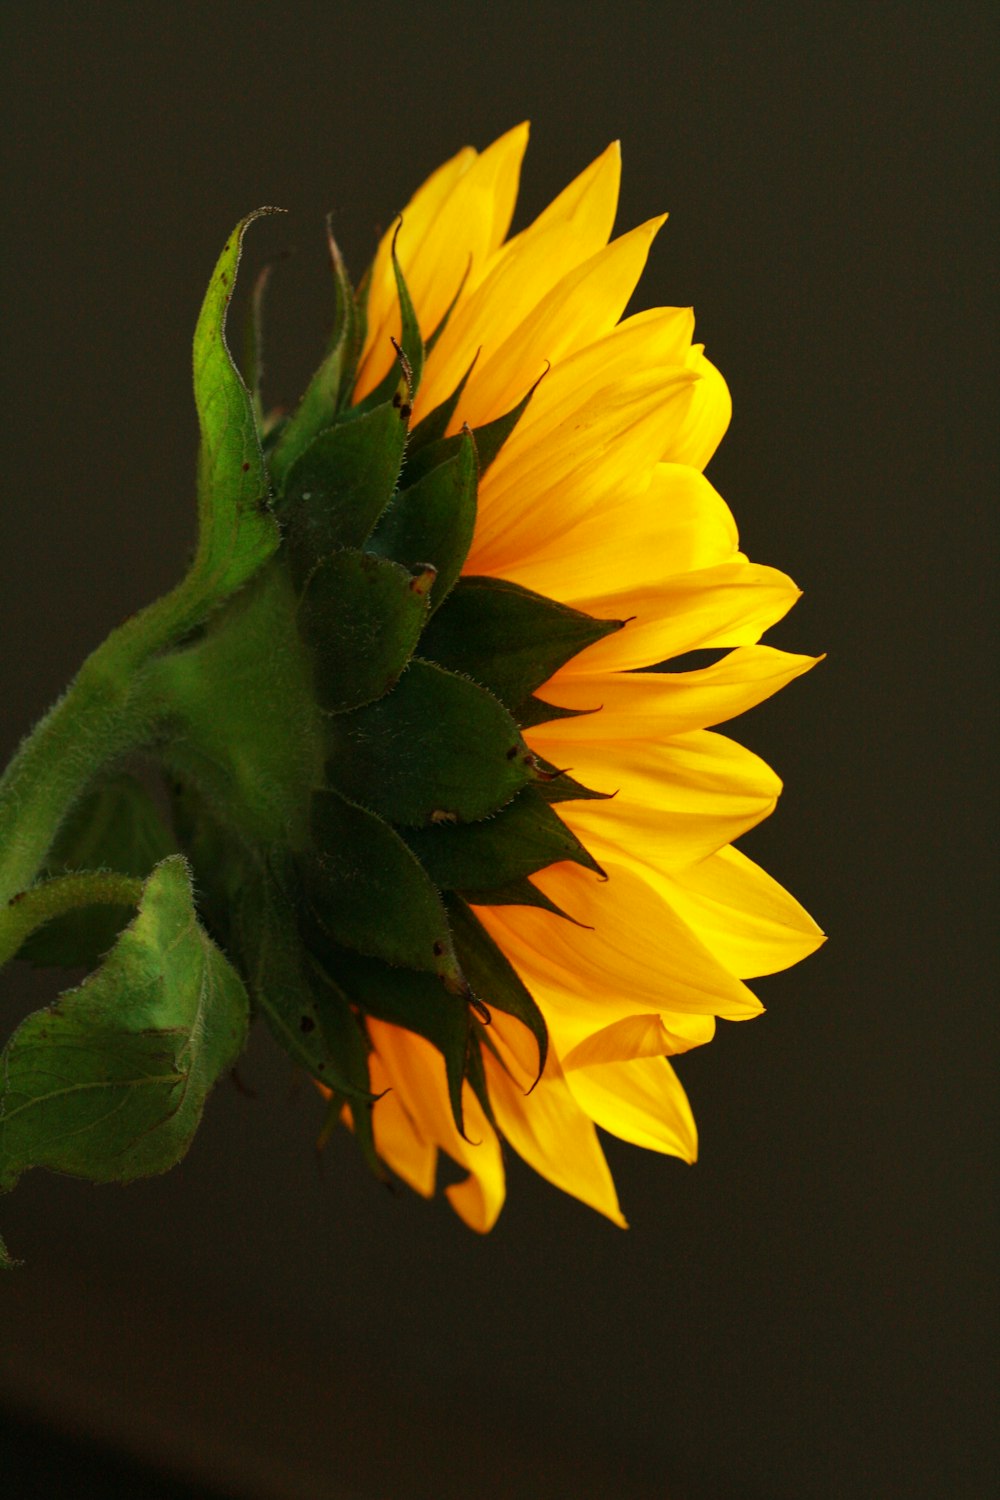 a yellow sunflower with green leaves in a vase